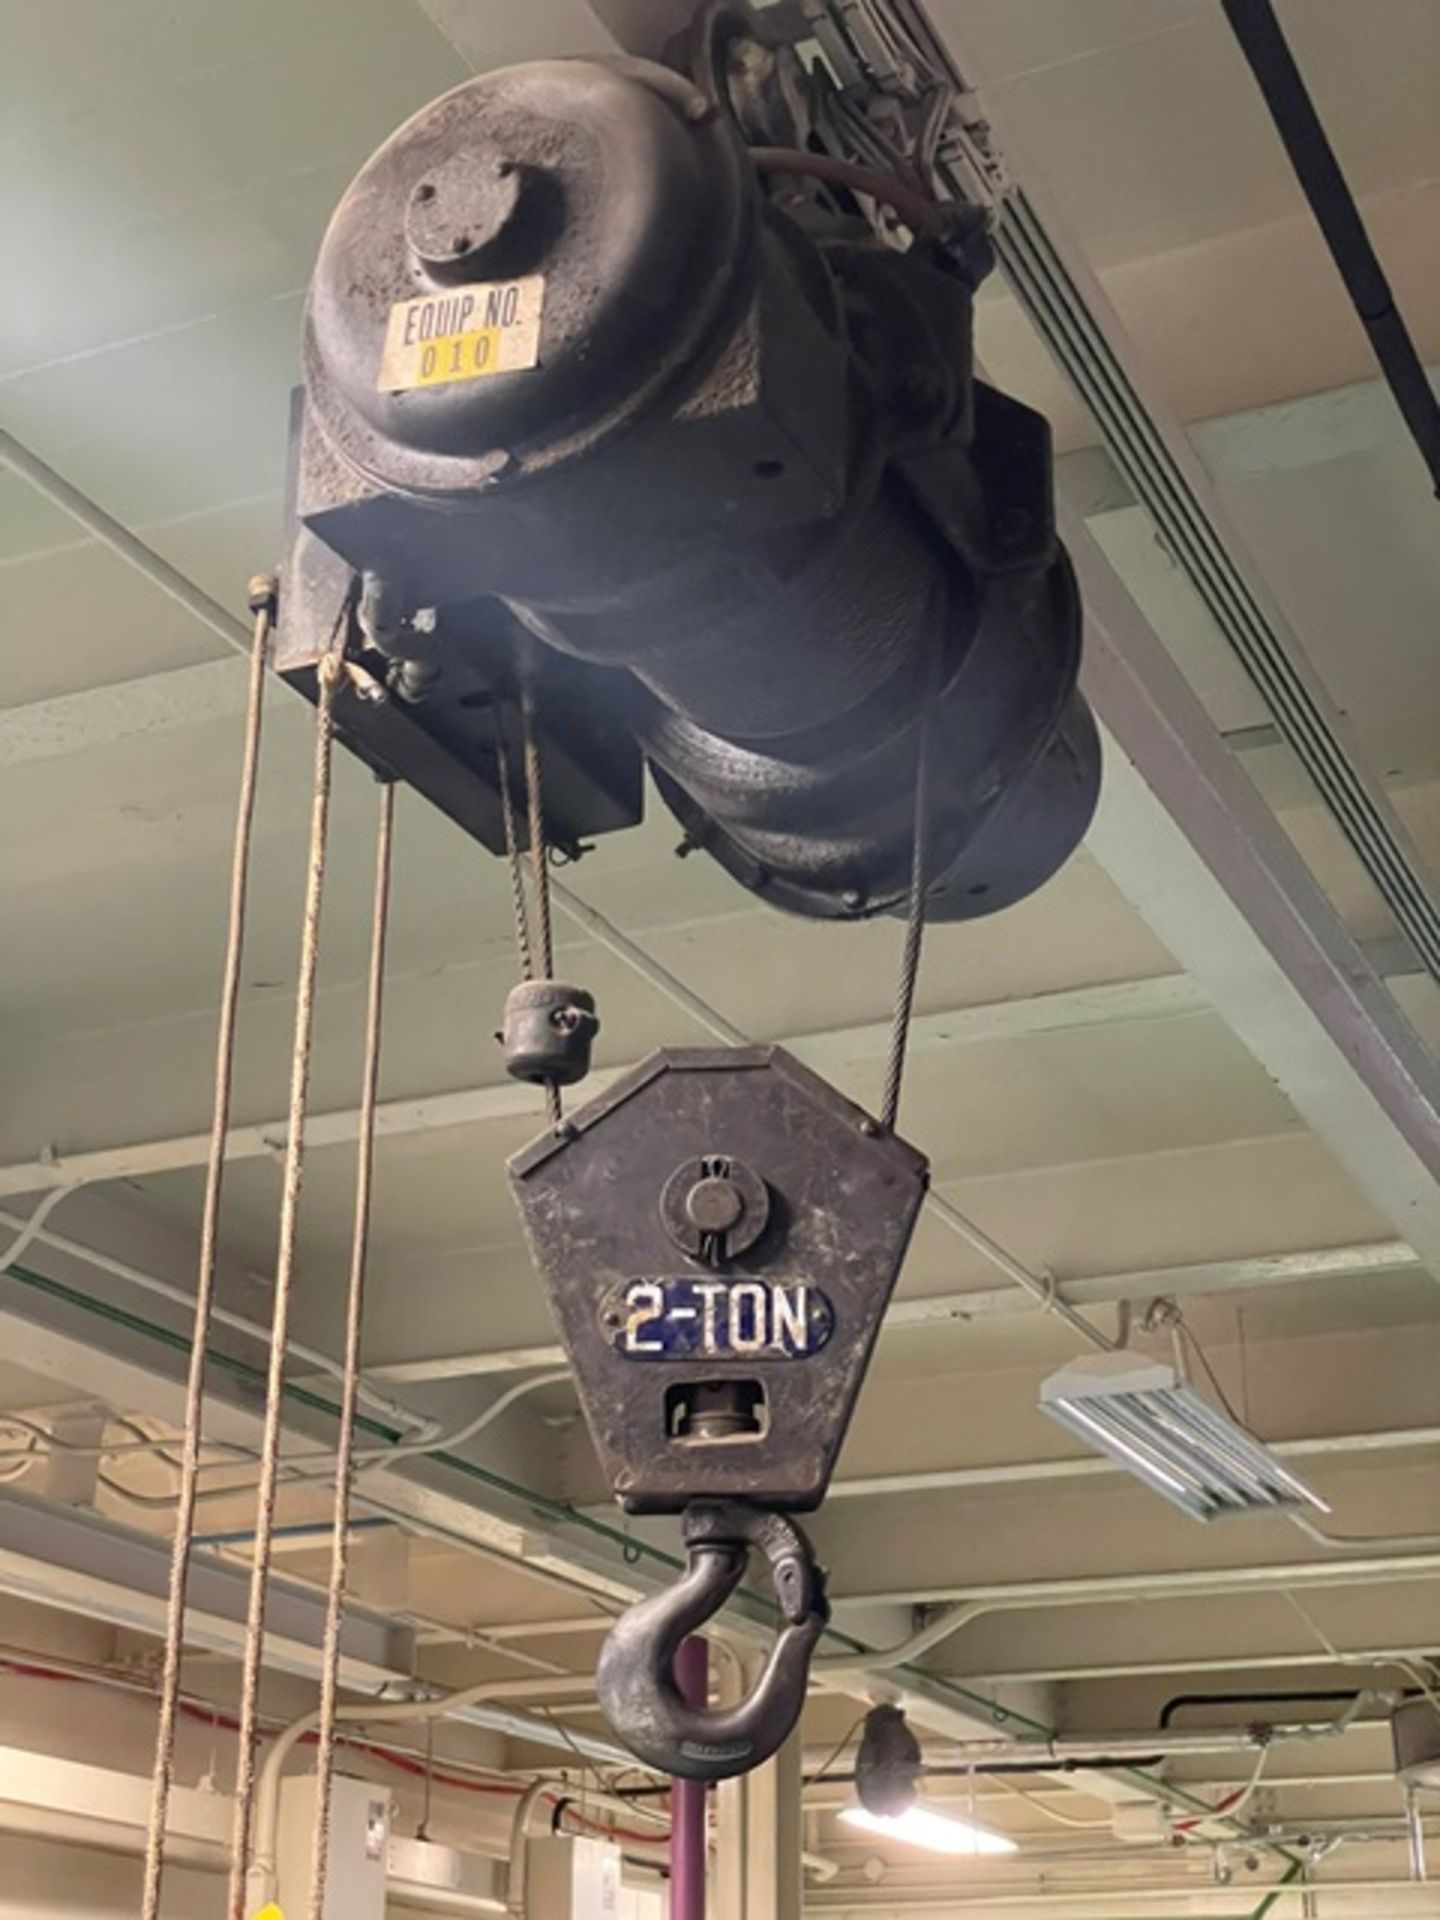 Electric Cable Hoist, Rated 2-Ton - Image 2 of 2